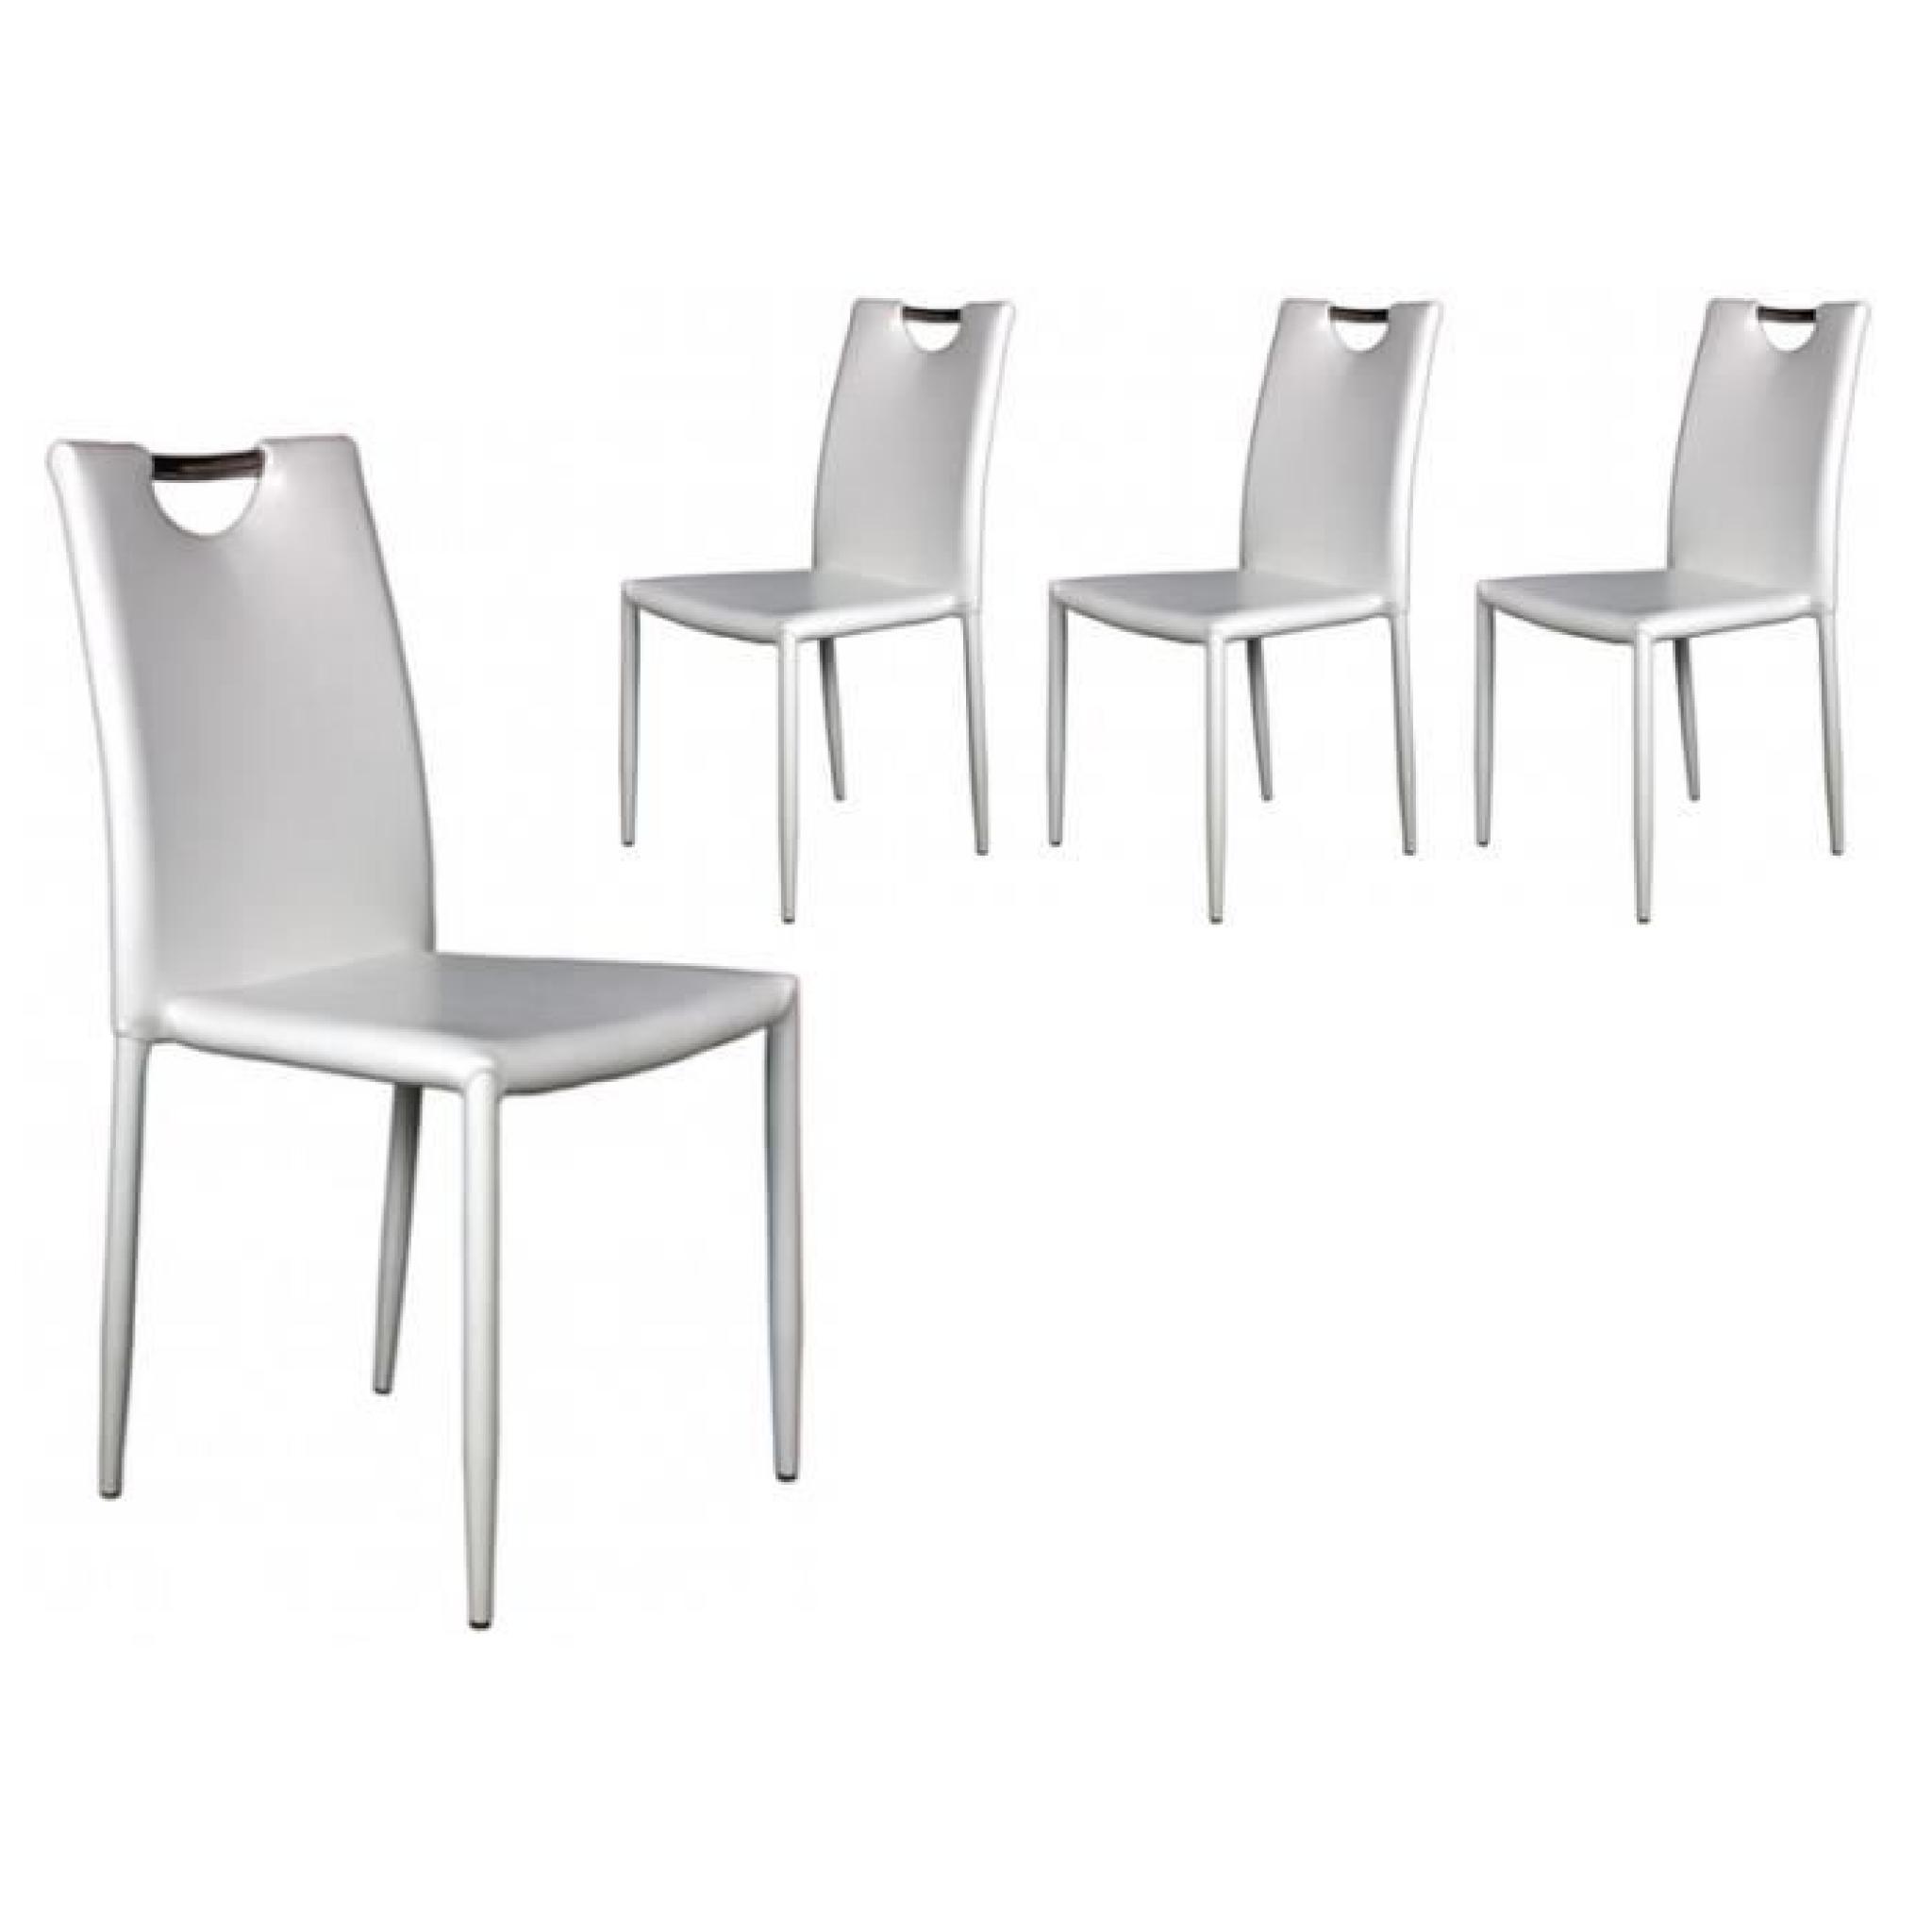 Kira - Lot 4 Chaises Blanches